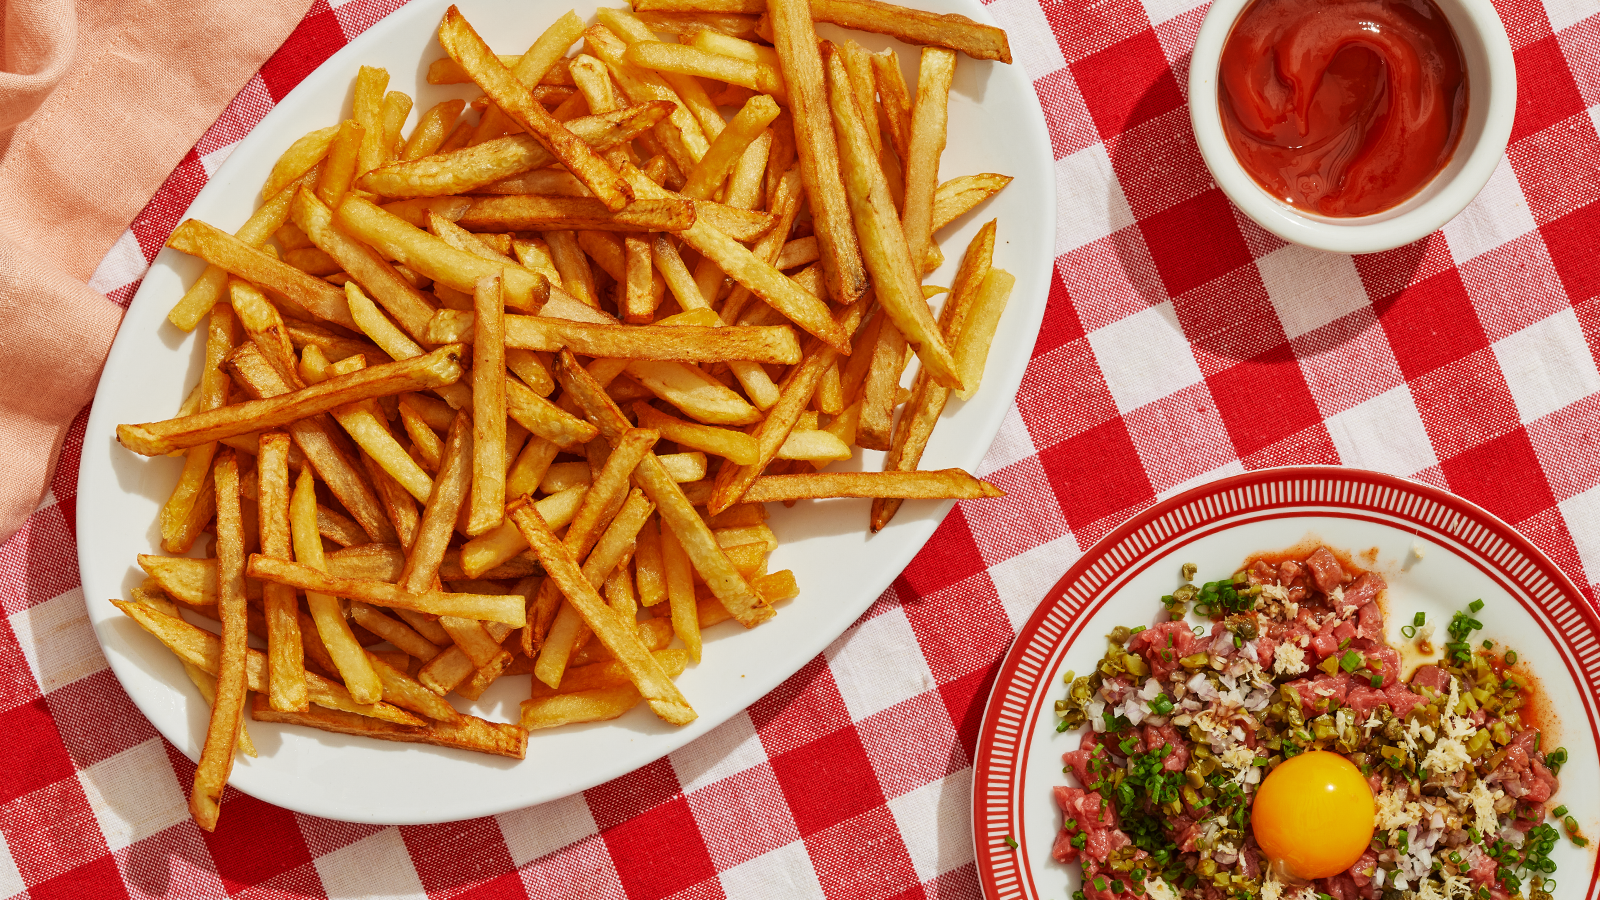 An overhead view of a plate of French fries and another plate of beef tartare.